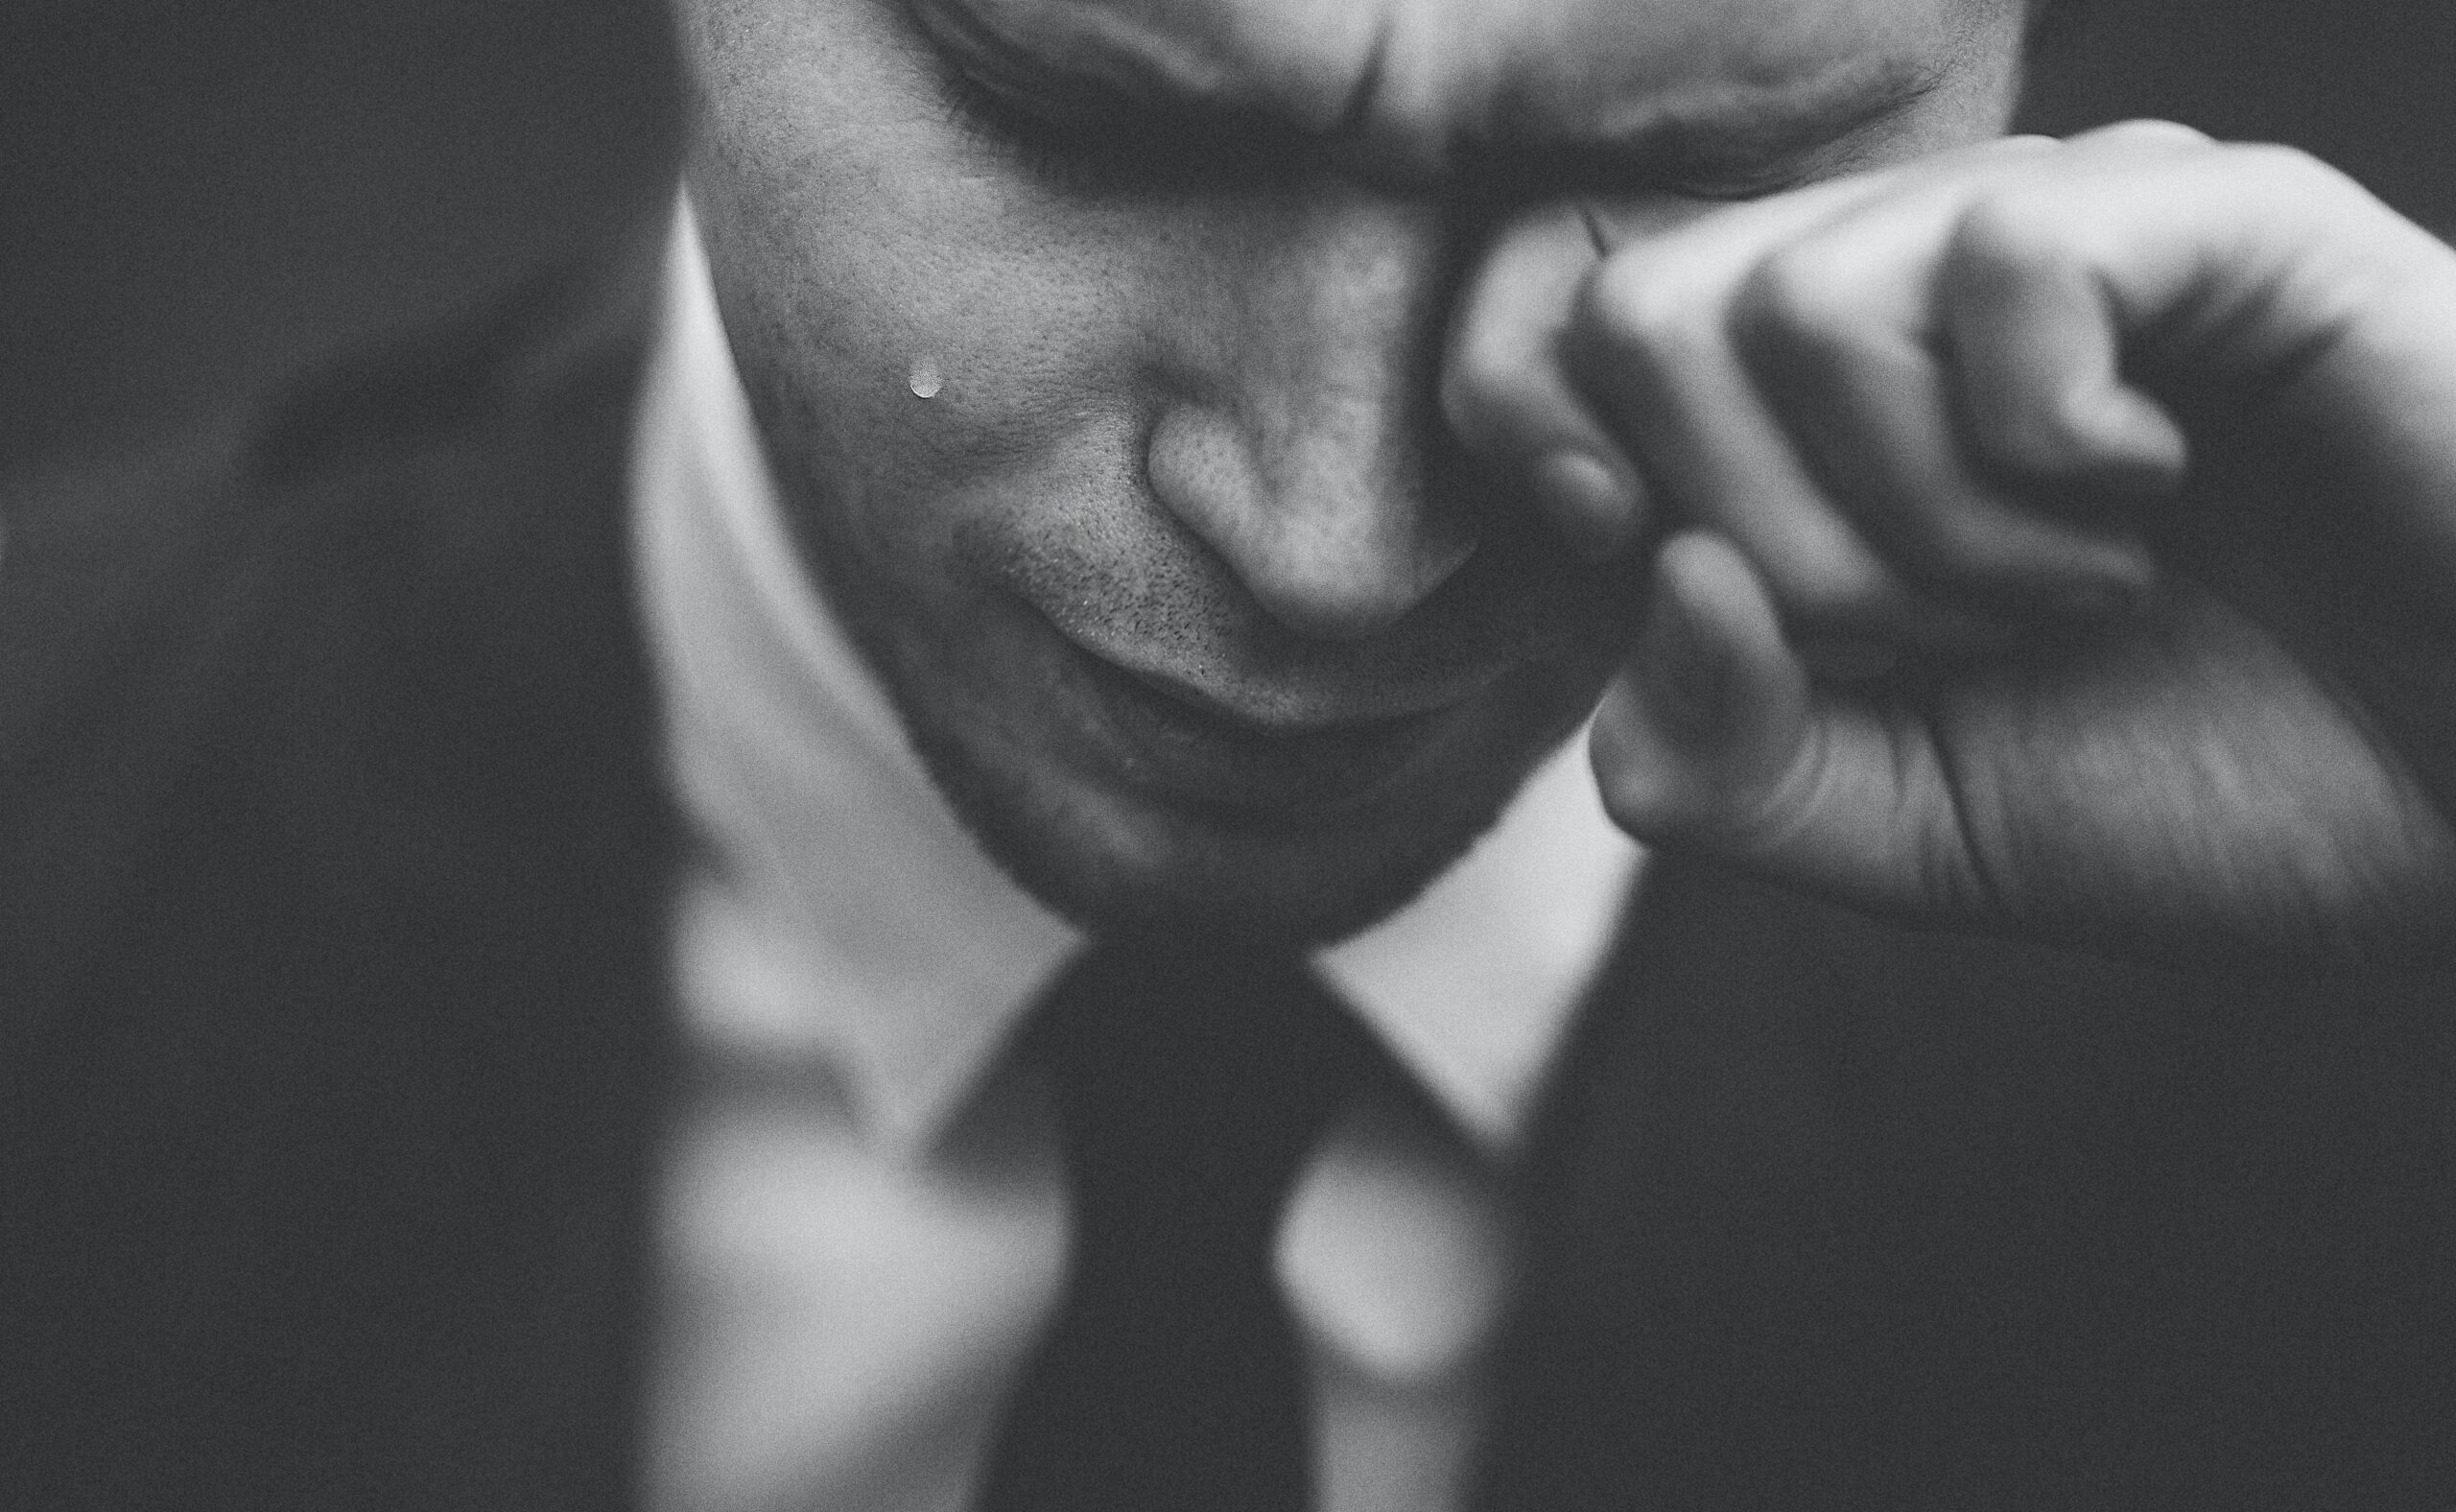 82% of men feel they can’t cry in public because of toxic masculinity